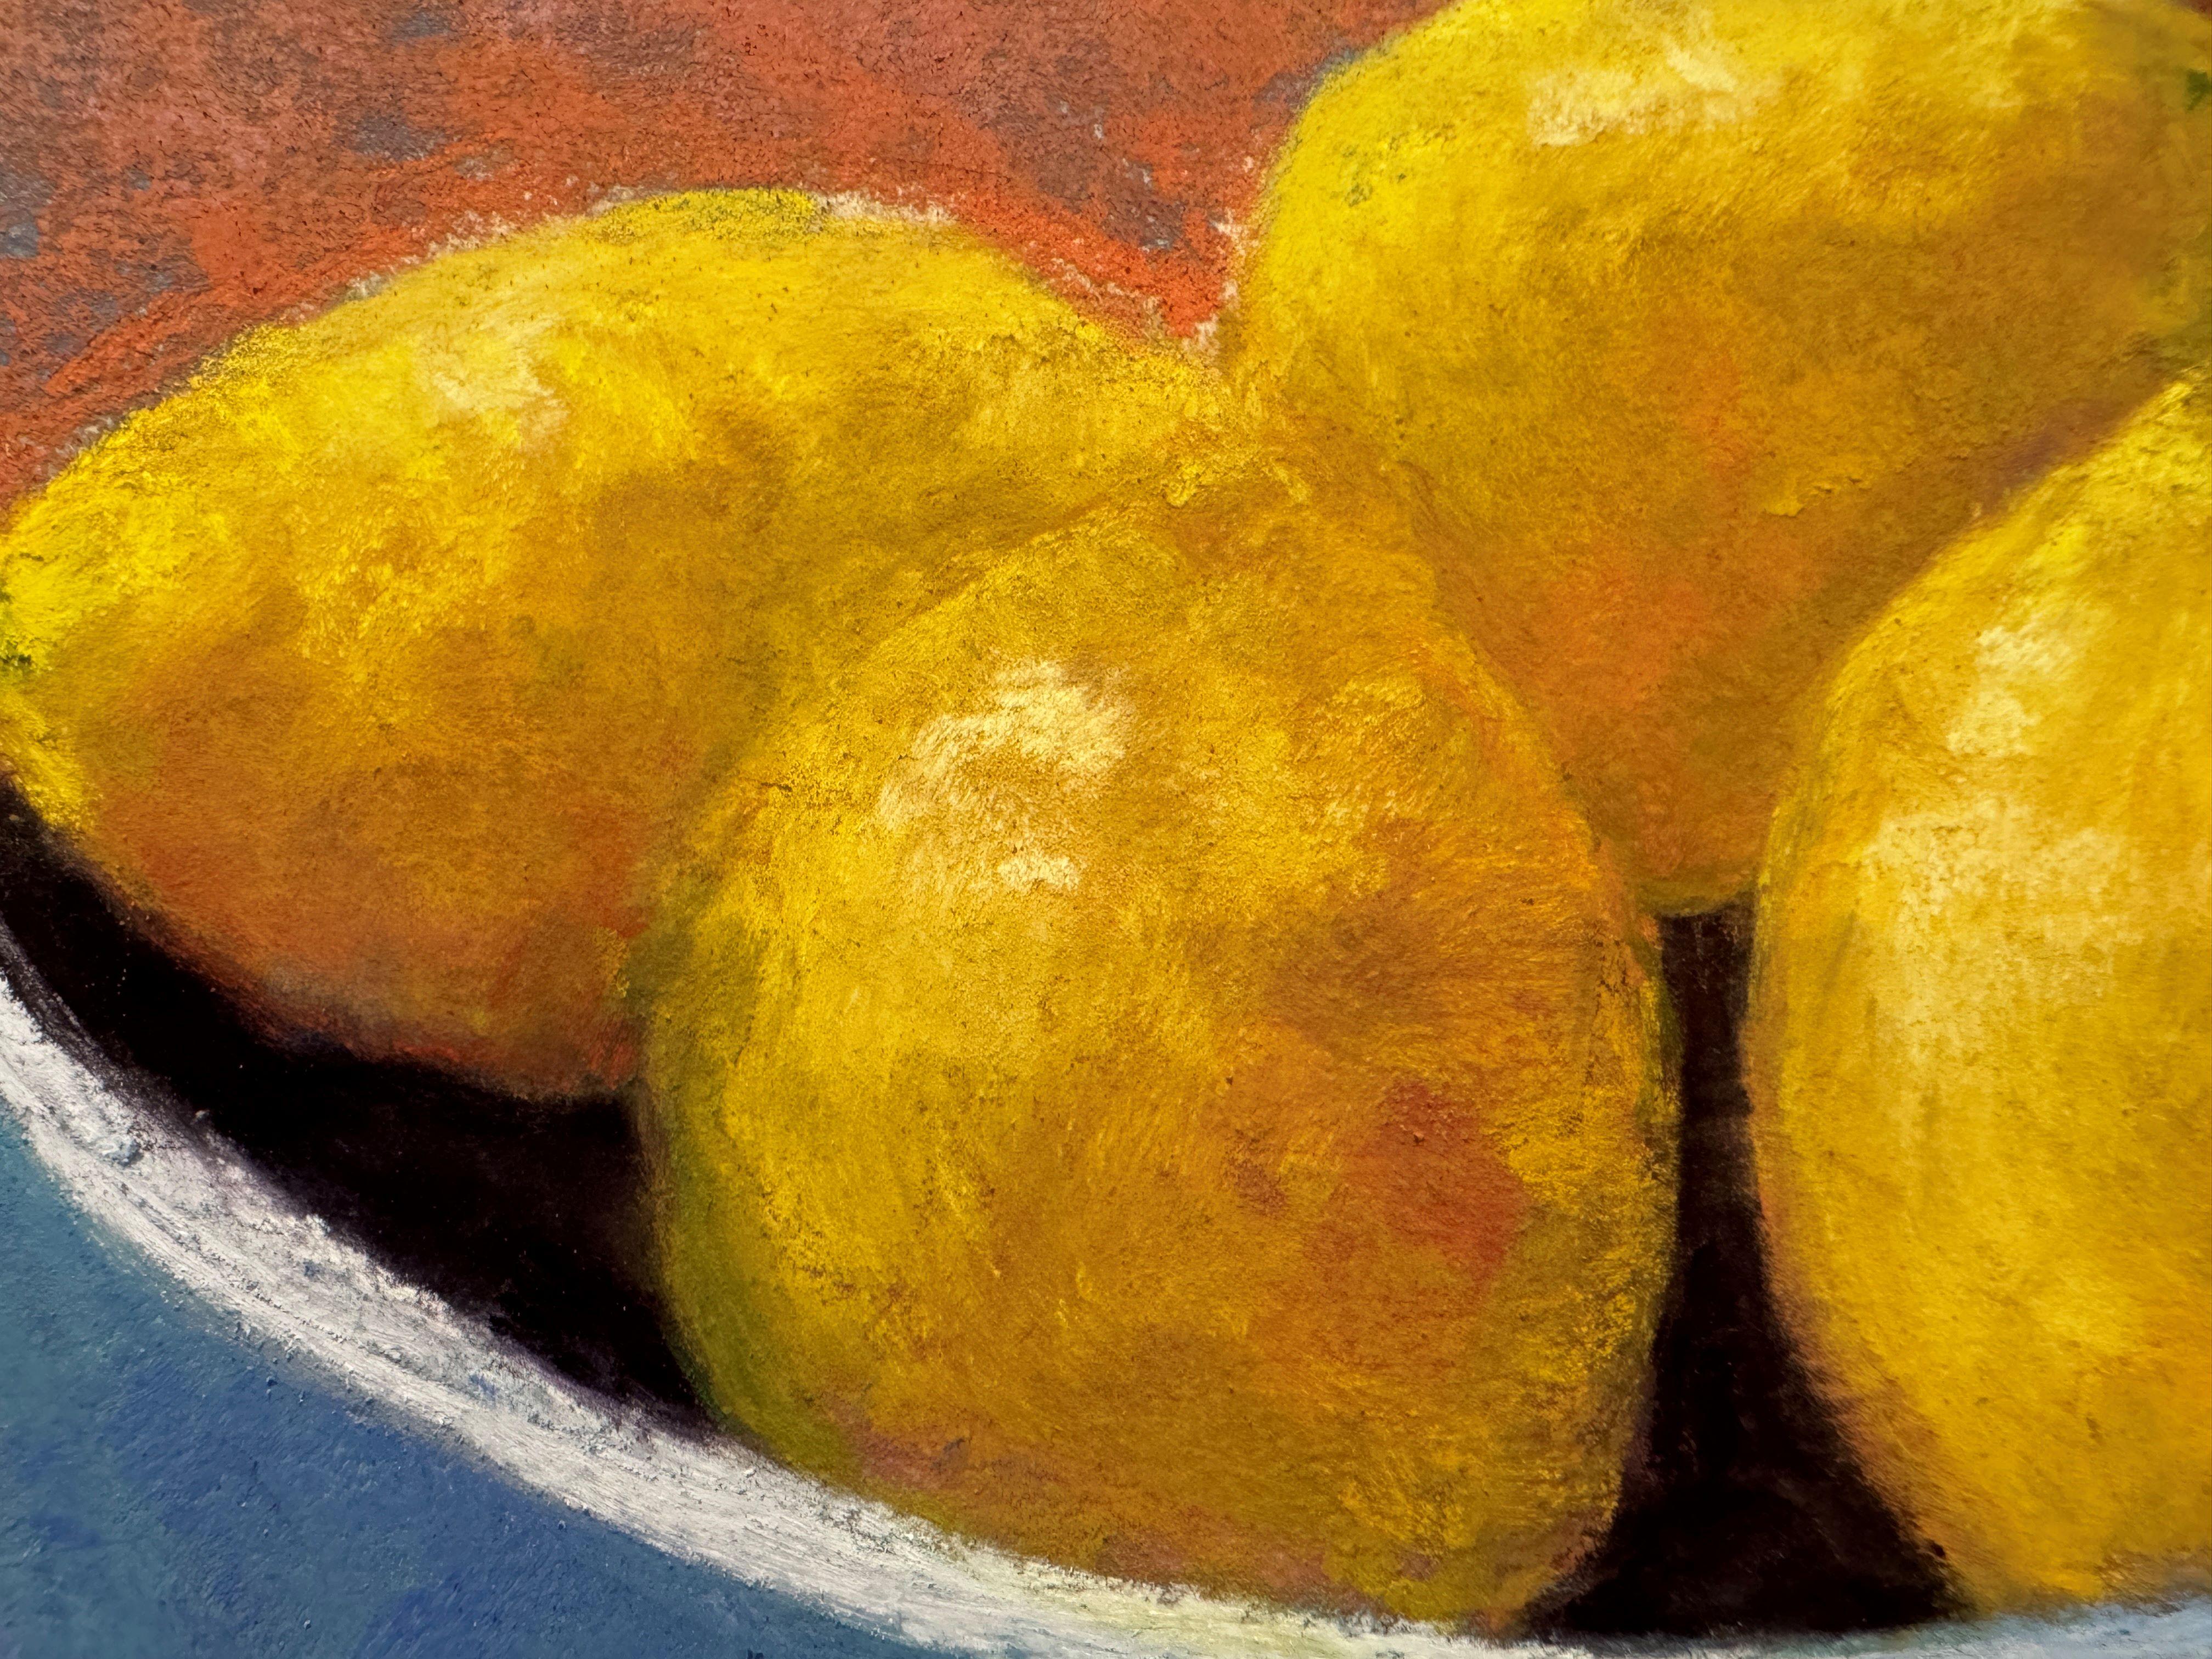 Blue Bowl with Lemons 
10.0 x 8.0 x 0.1, 1.0 lbs 
Pastel on archival paper
Hand signed by artist 

Artist's Commentary: 
